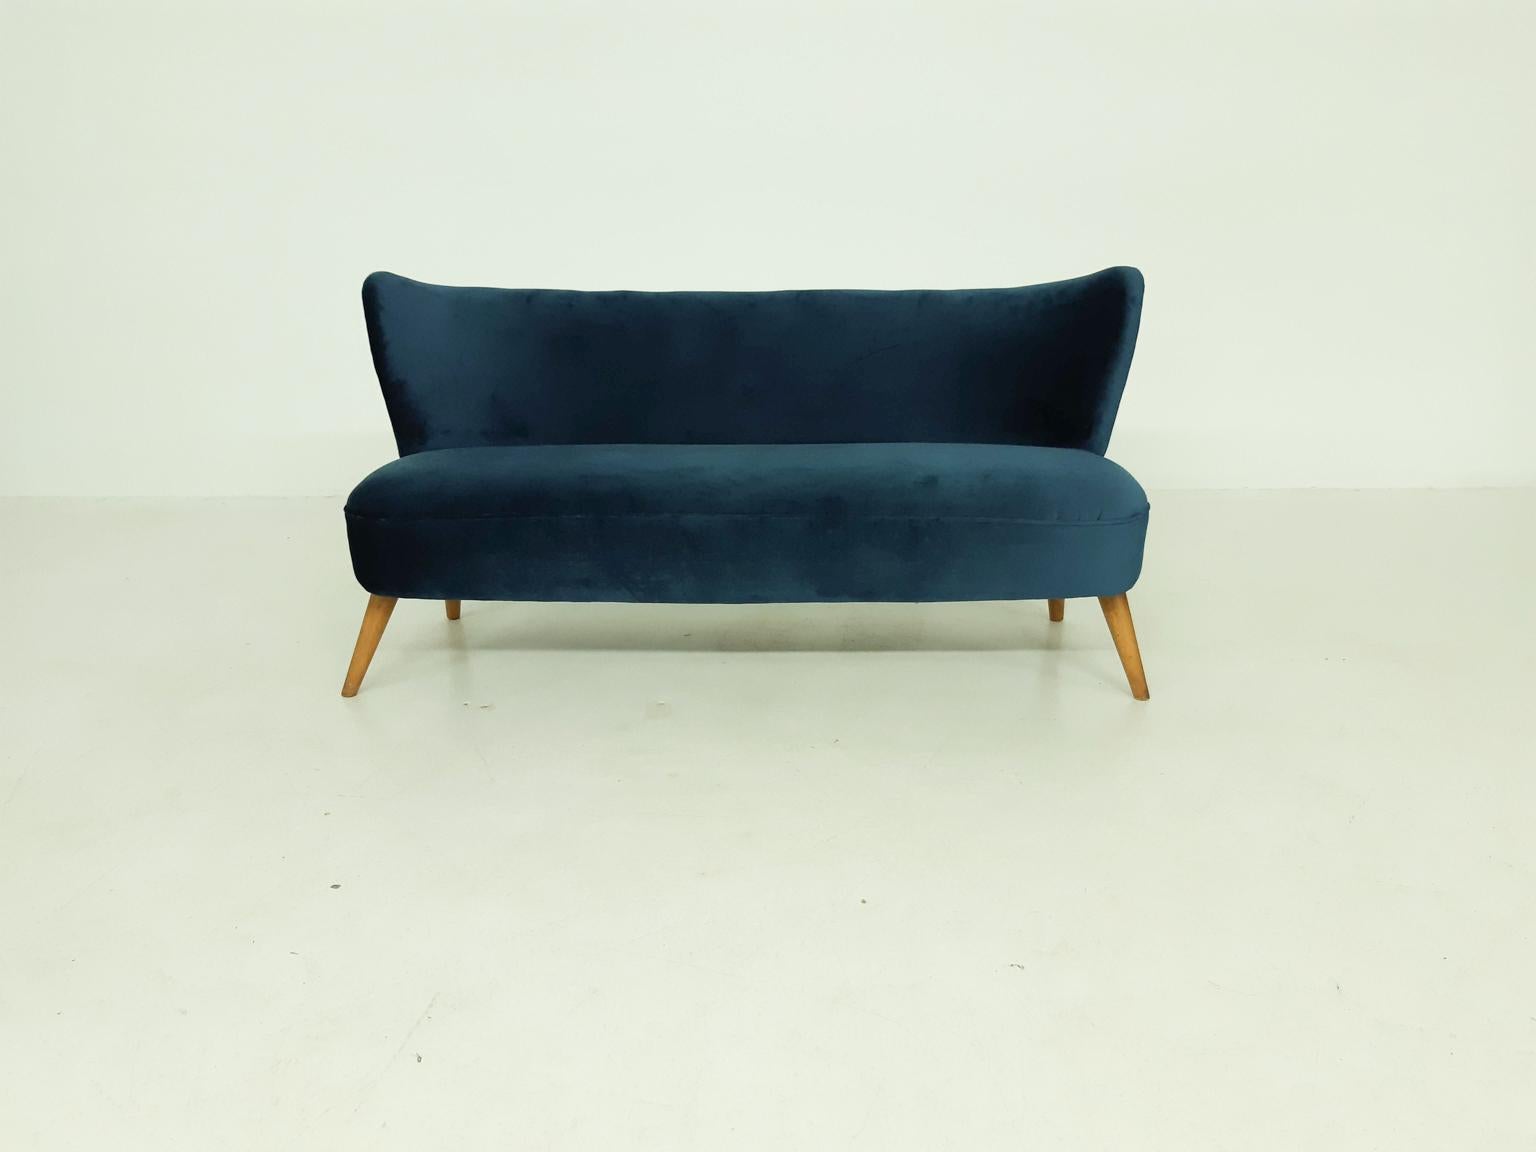 Nice vintage sofa. The cocktail sofa is professionally re-upholstered in green petrol velvet fabric. Its feet are made of wood. The design is probably from Italy or The Netherlands. Its has some similarities with the Dutch sofa's by Artifort and